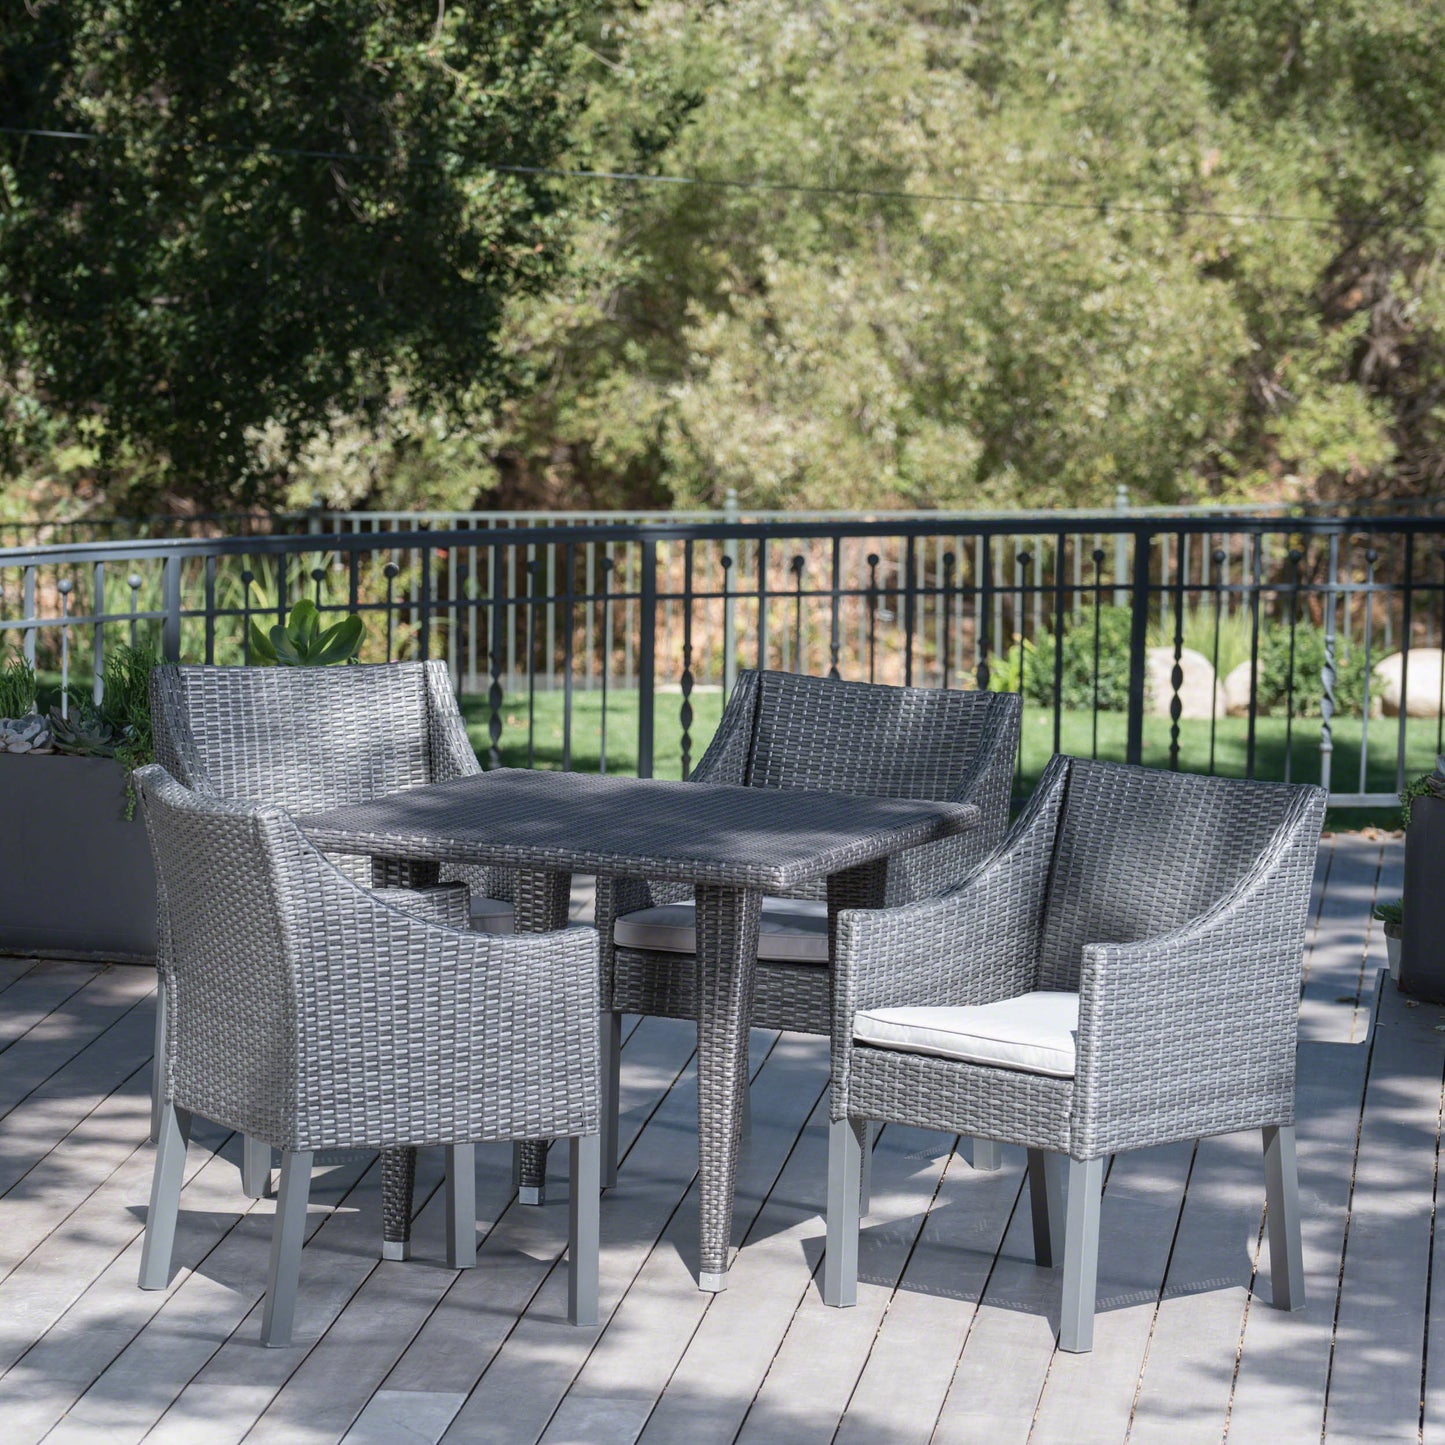 Del Mar Outdoor 5 Piece Gray Wicker Dining Set with Water Resistant Cushions